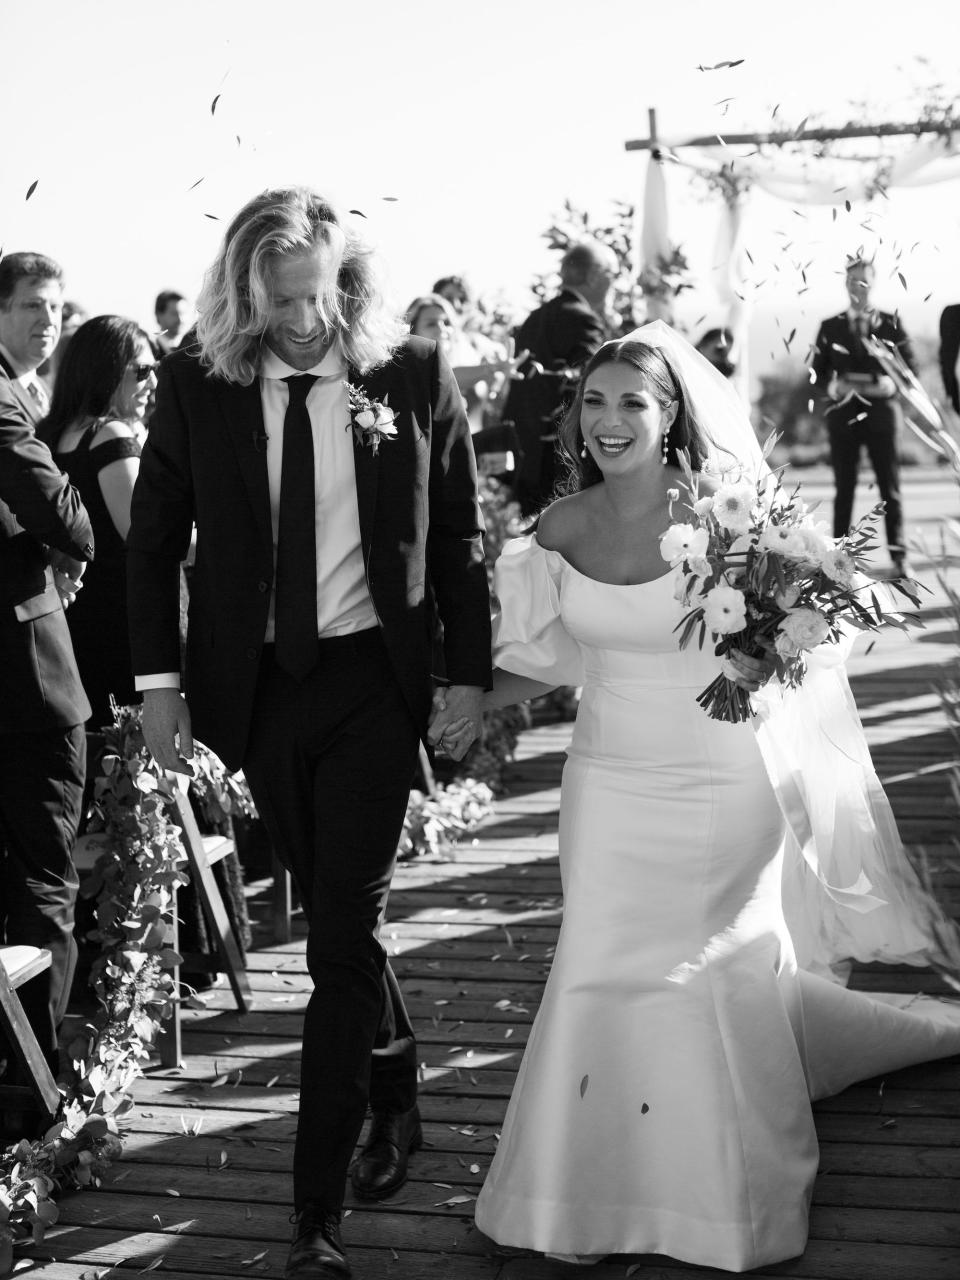 A black and white shot of a bride and groom hold hands as they exit their wedding ceremony.